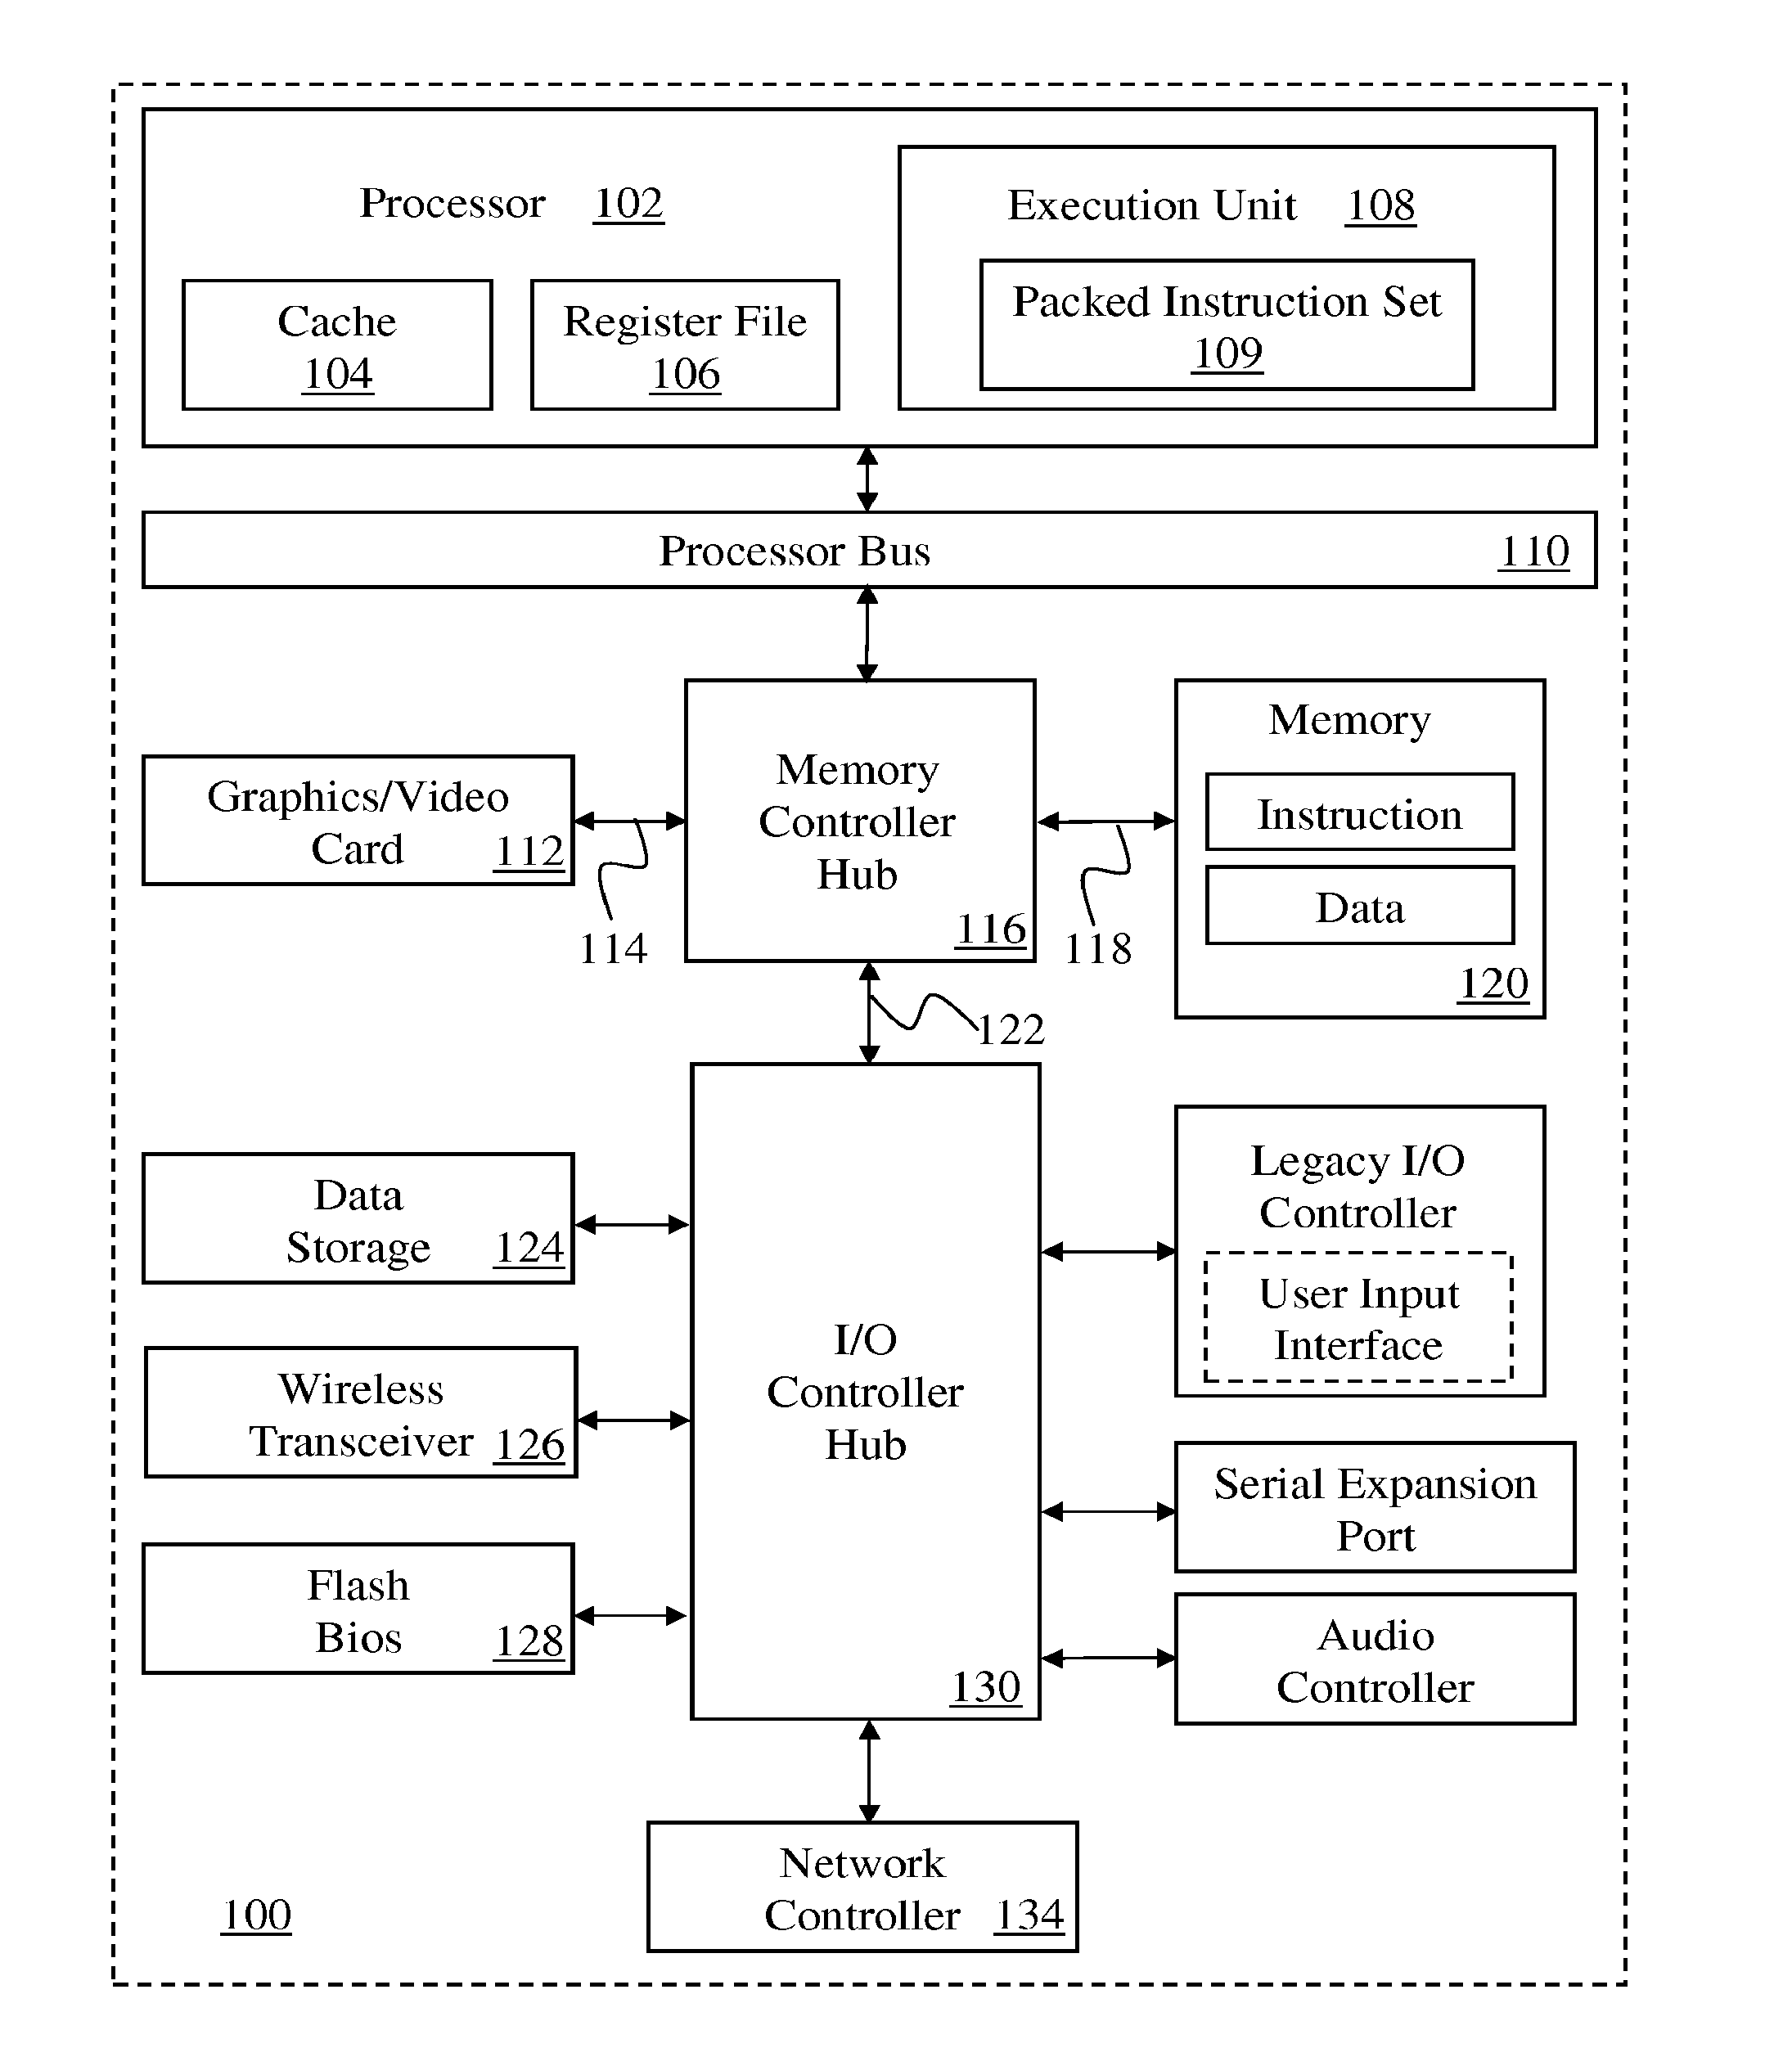 Instruction and logic to provide vector scatter-op and gather-op functionality